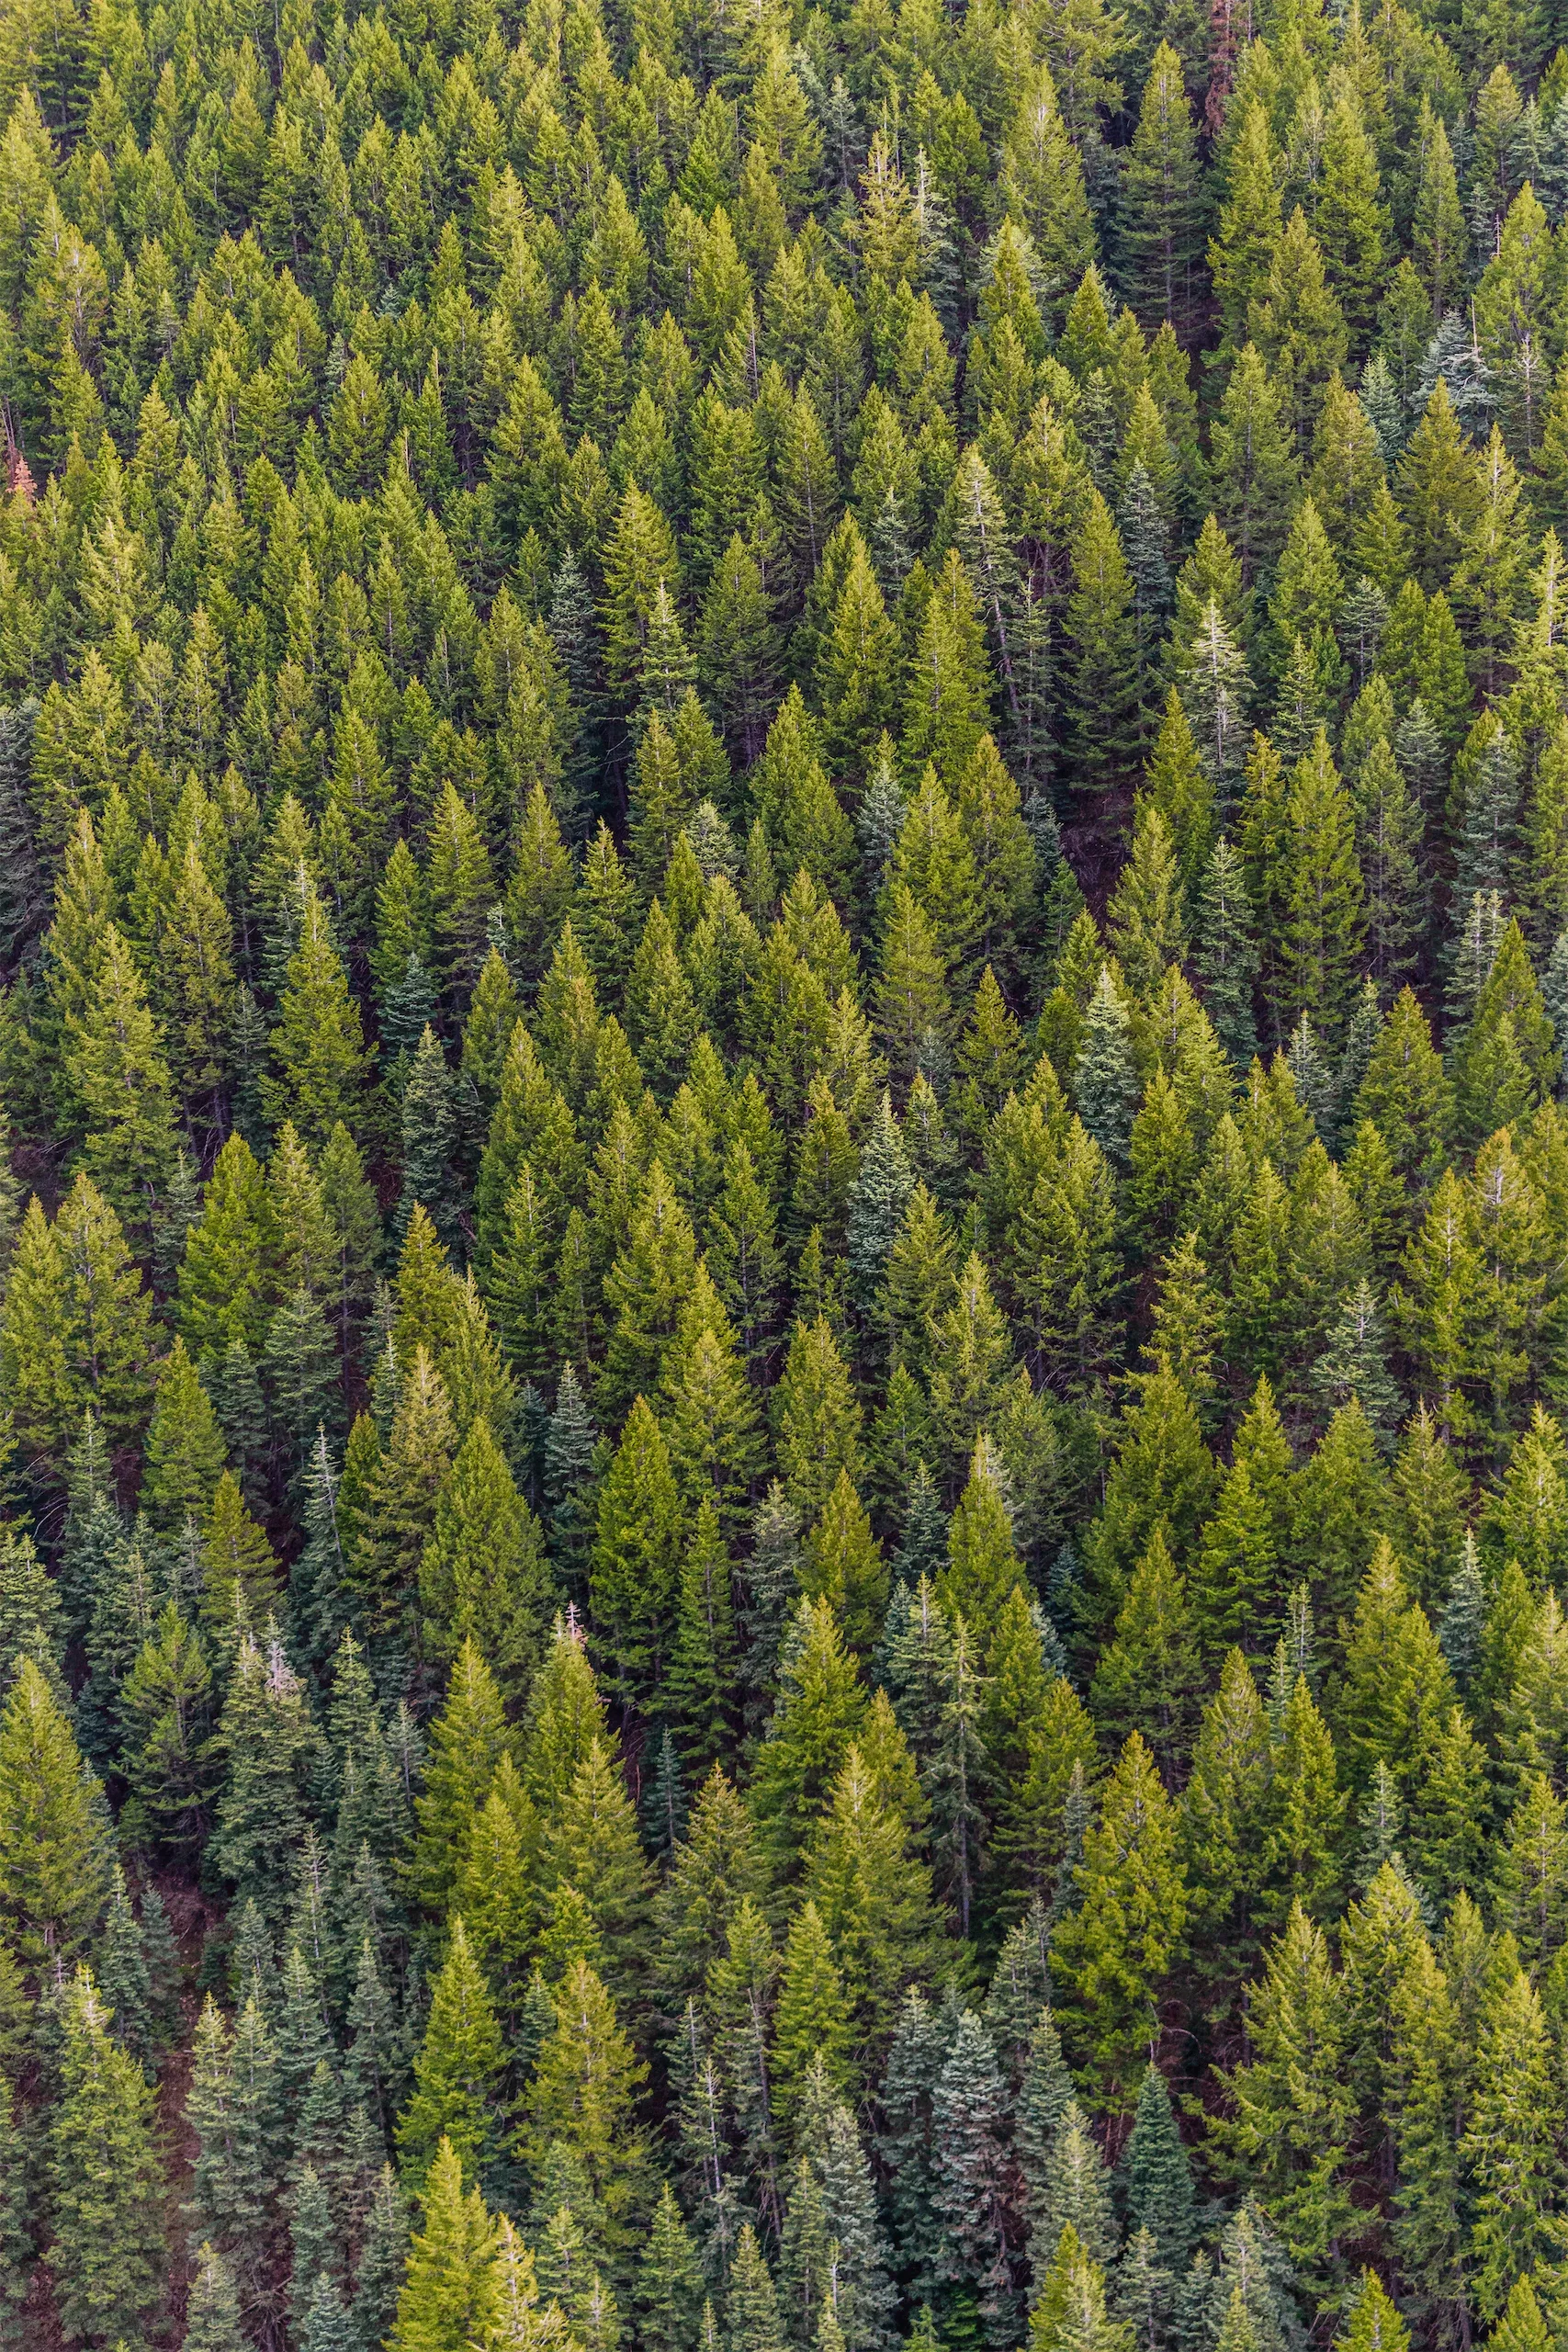 An aerial view of a densly-packed forest full of trees